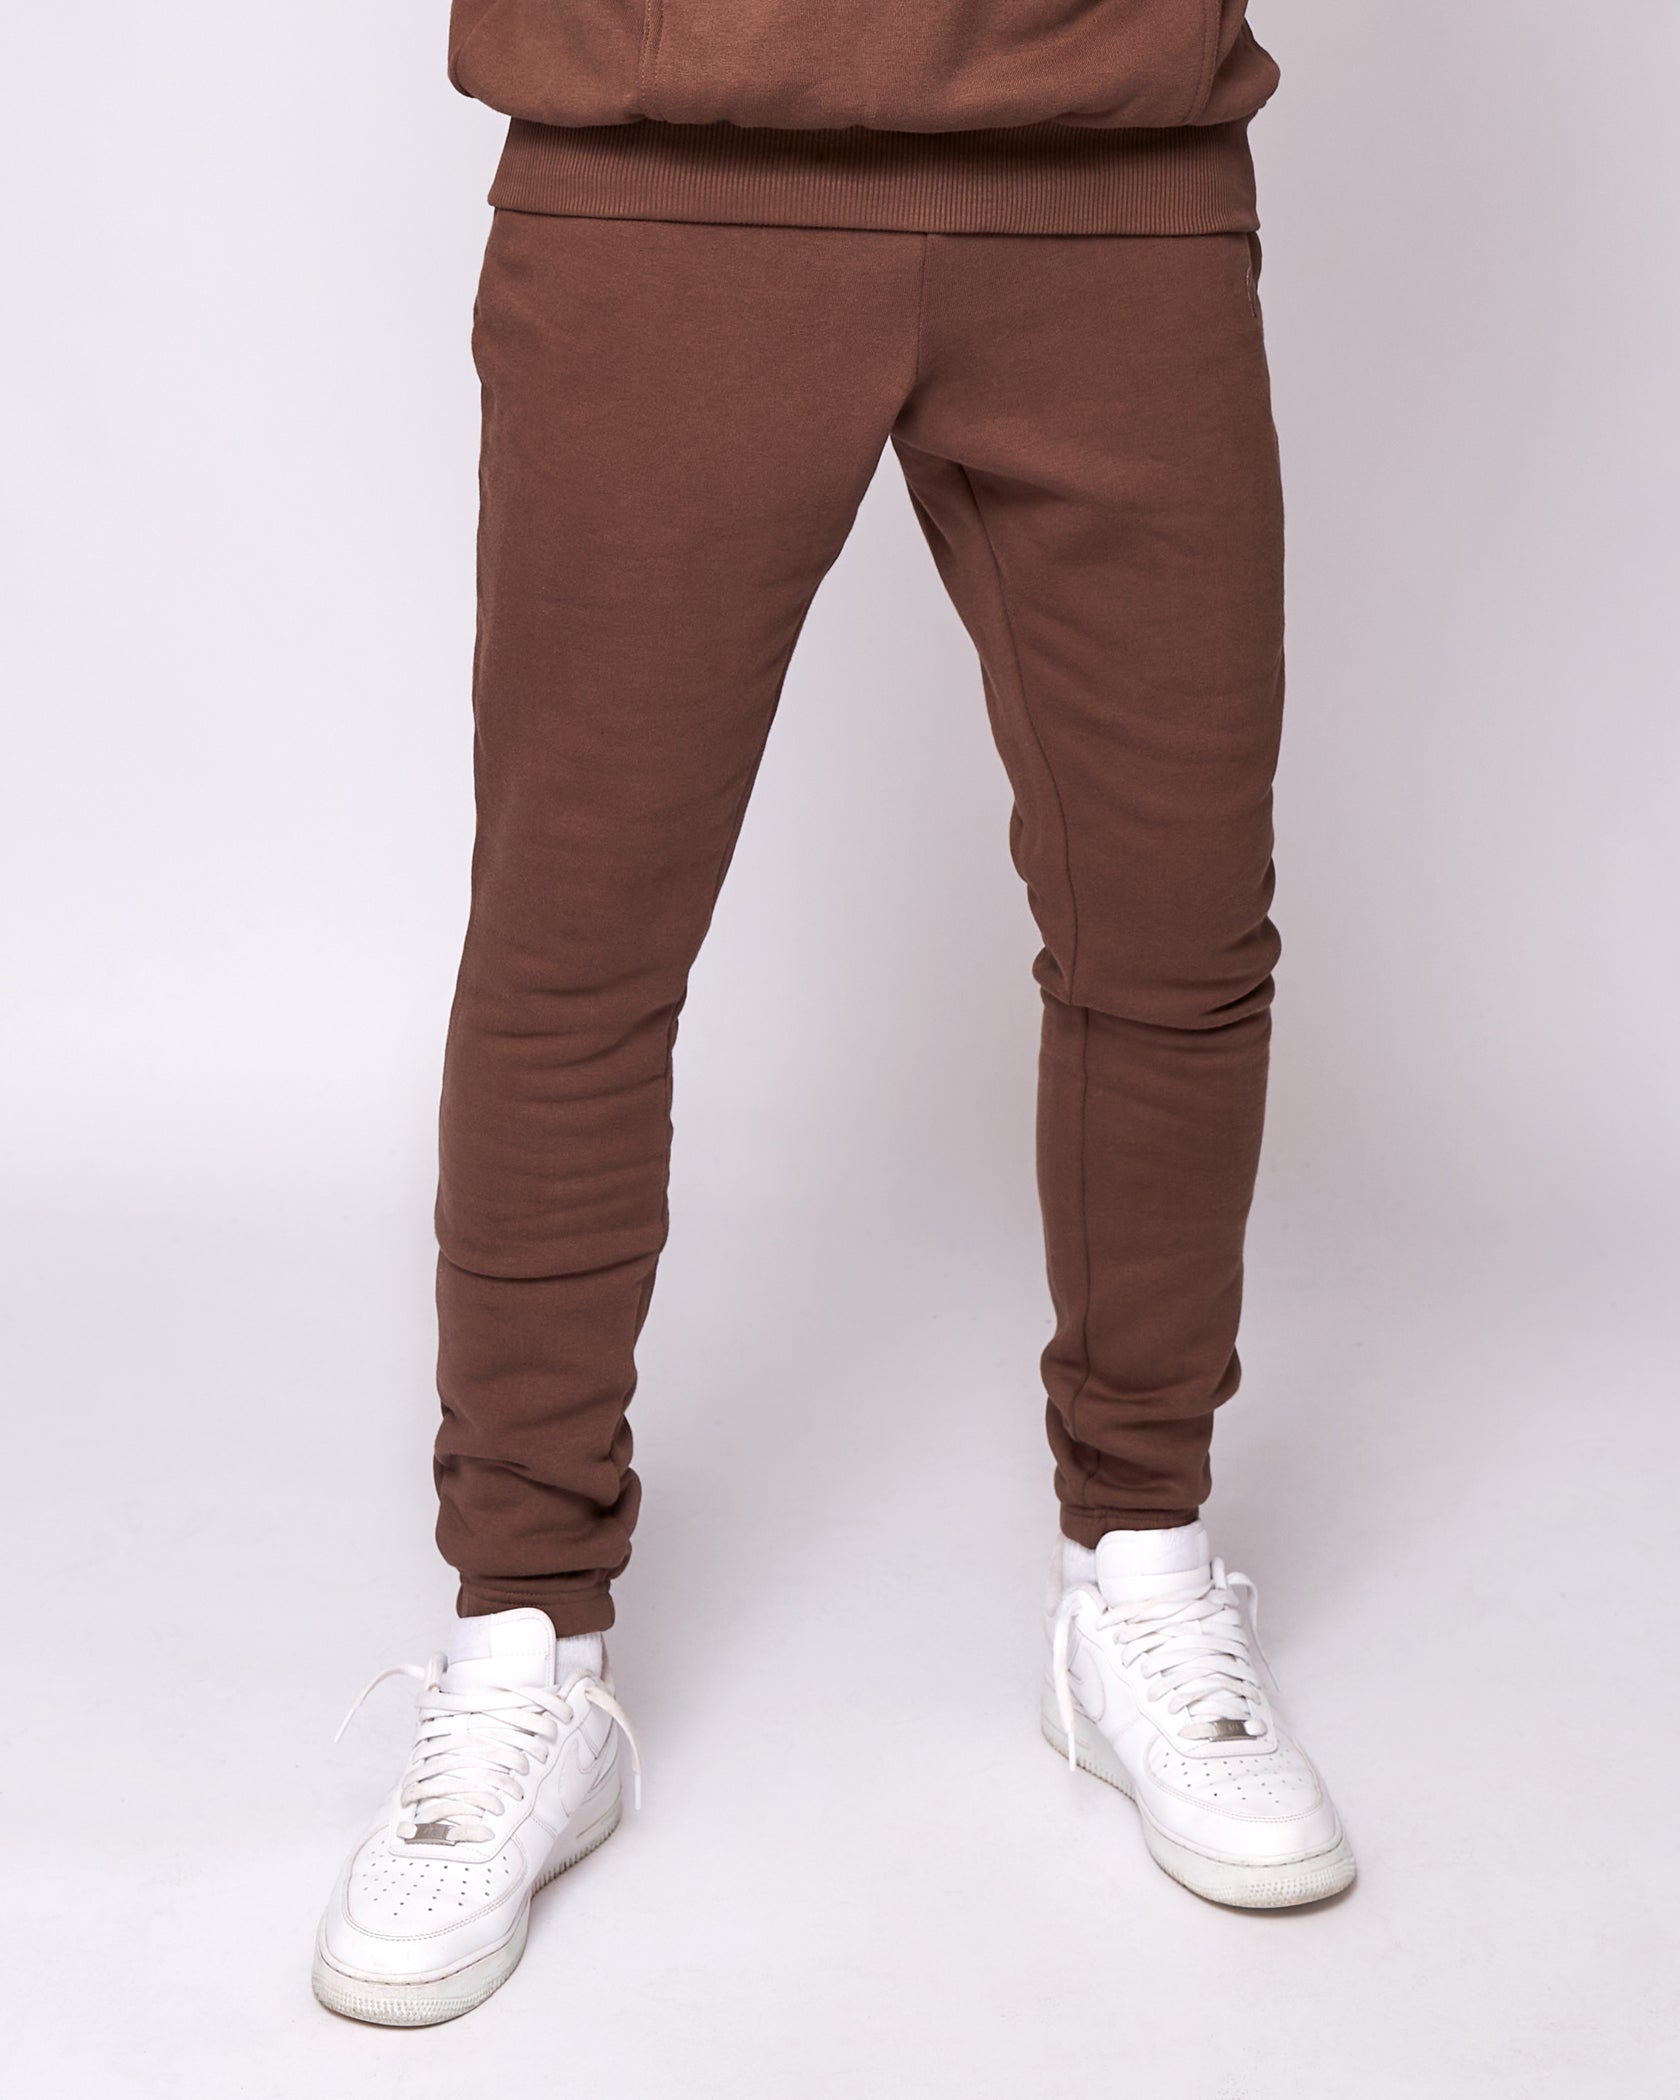 Essential Jogger - Chocolate - Fortex Fitness